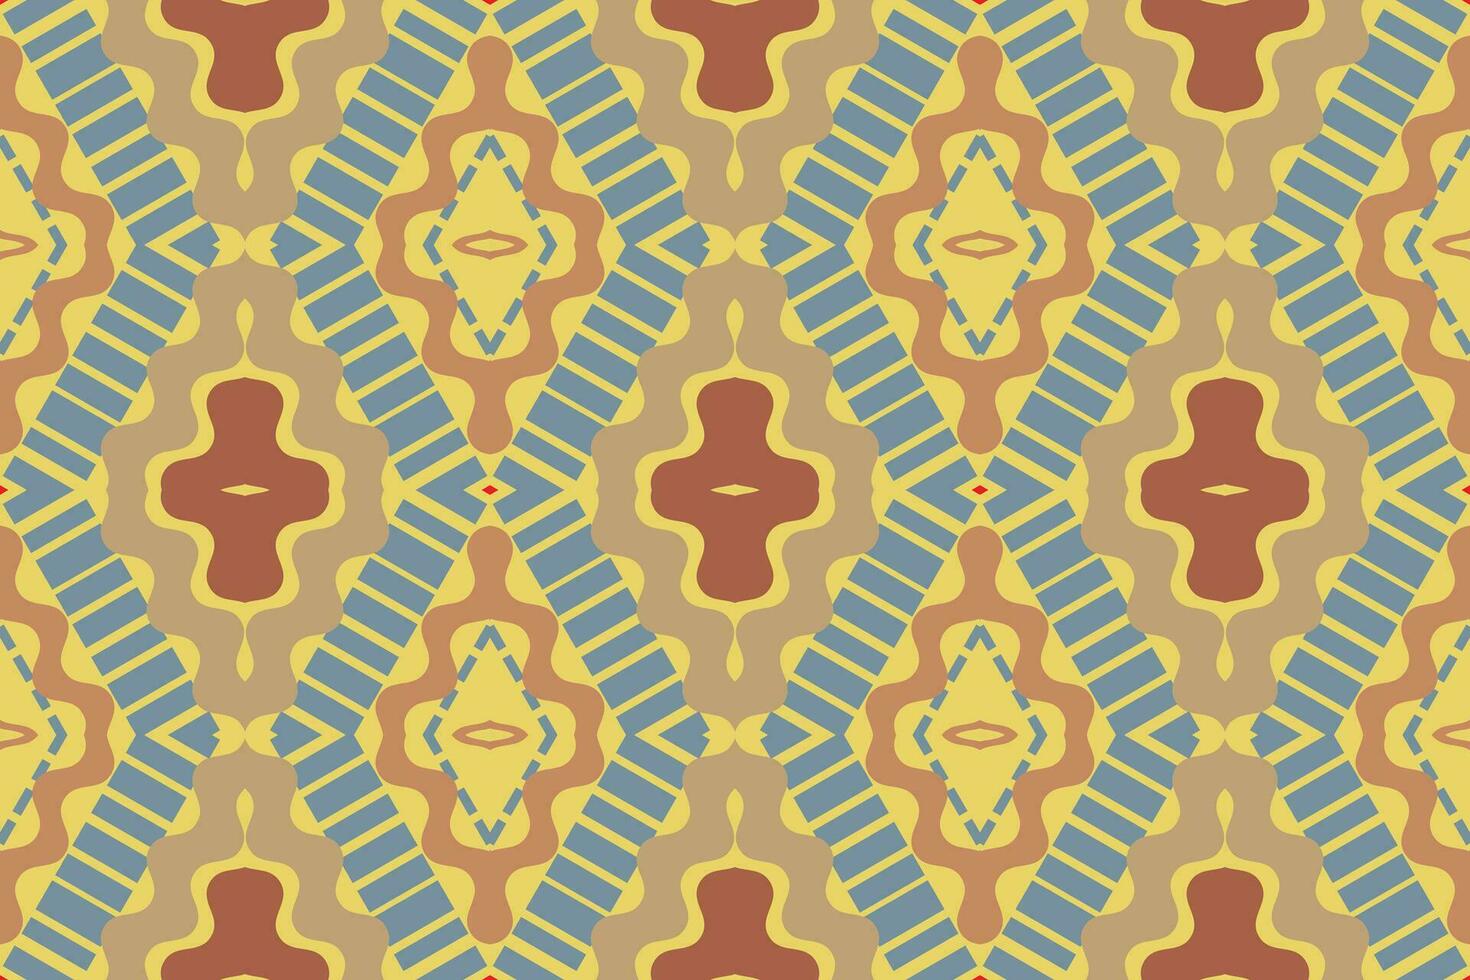 Ikat Damask Paisley Embroidery Background. Ikat Damask Geometric Ethnic Oriental Pattern Traditional. Ikat Aztec Style Abstract Design for Print Texture,fabric,saree,sari,carpet. vector